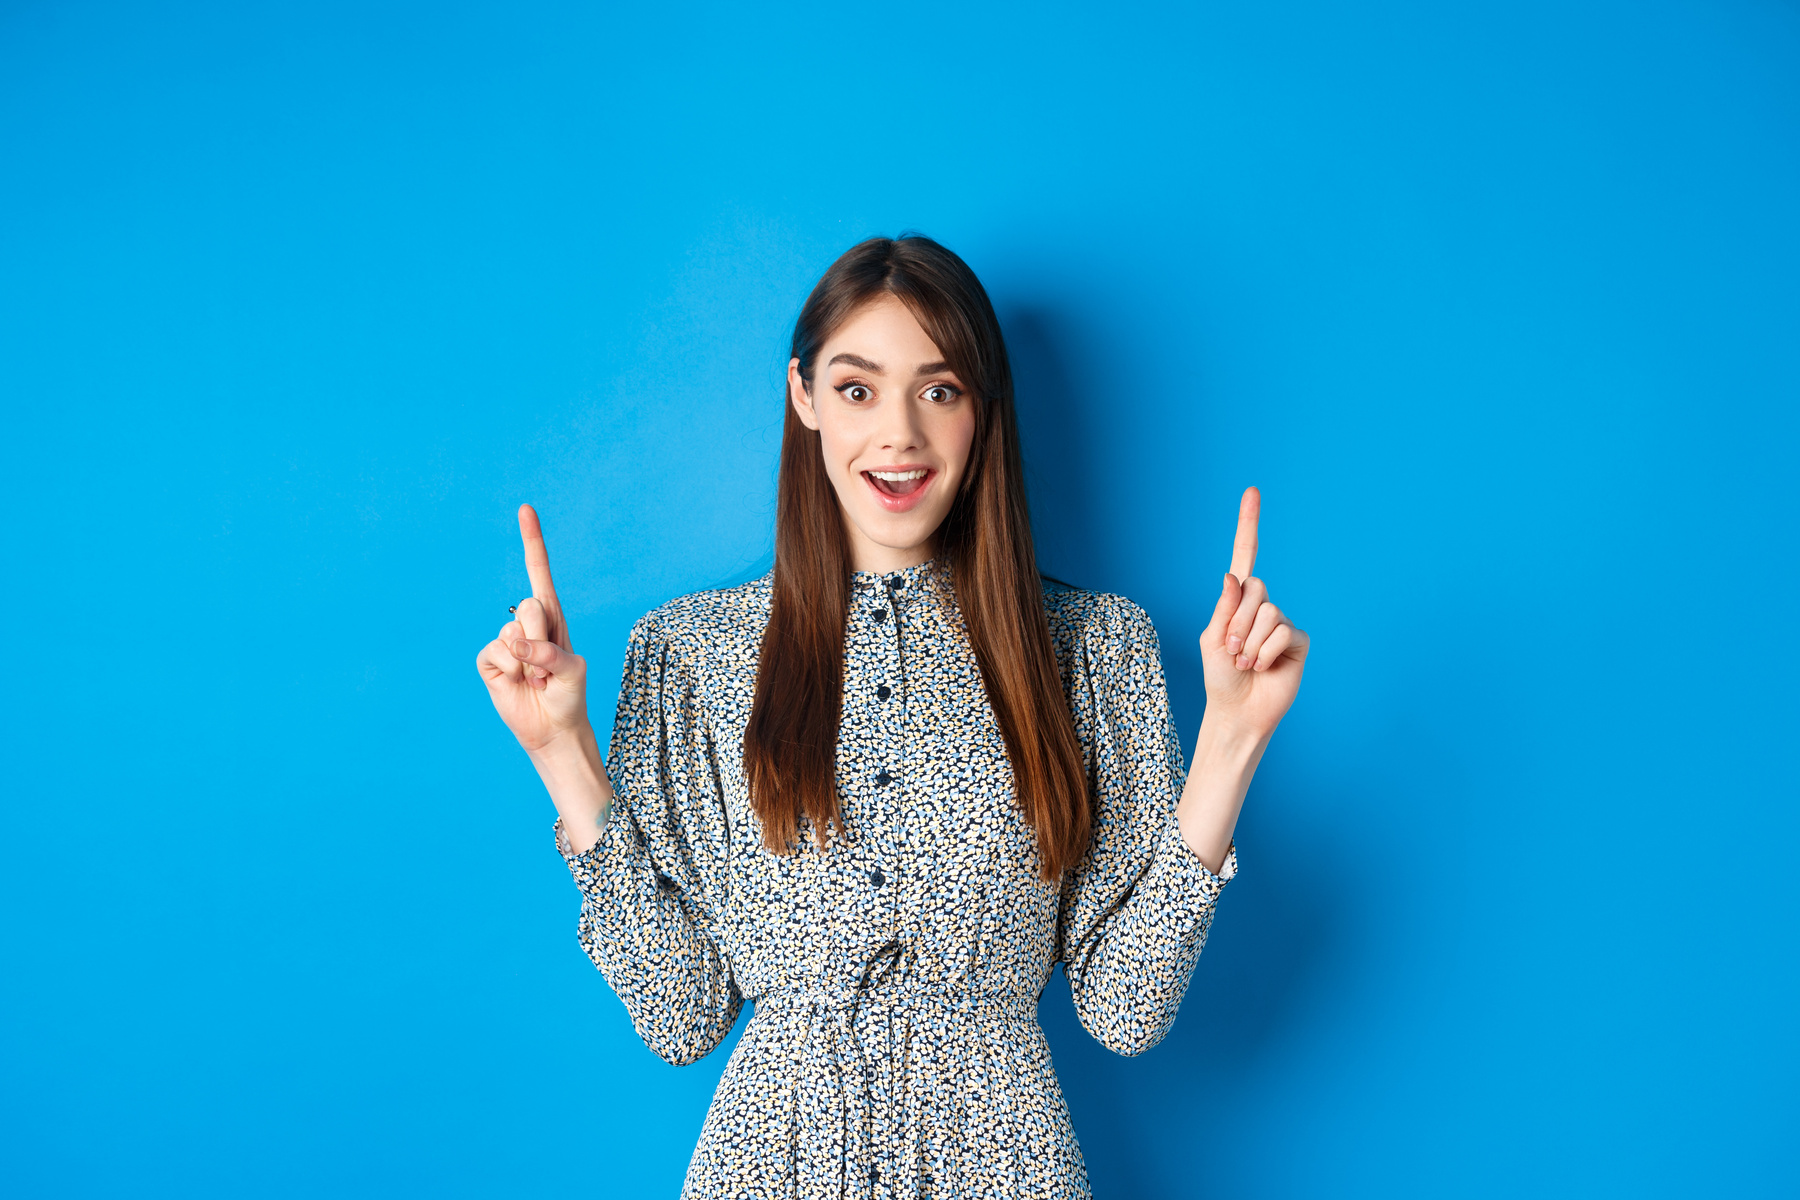 Excited and Happy Young Woman in Dress Checking Out Special Offer, Pointing Fingers up and Smiling, Standing against Blue Background